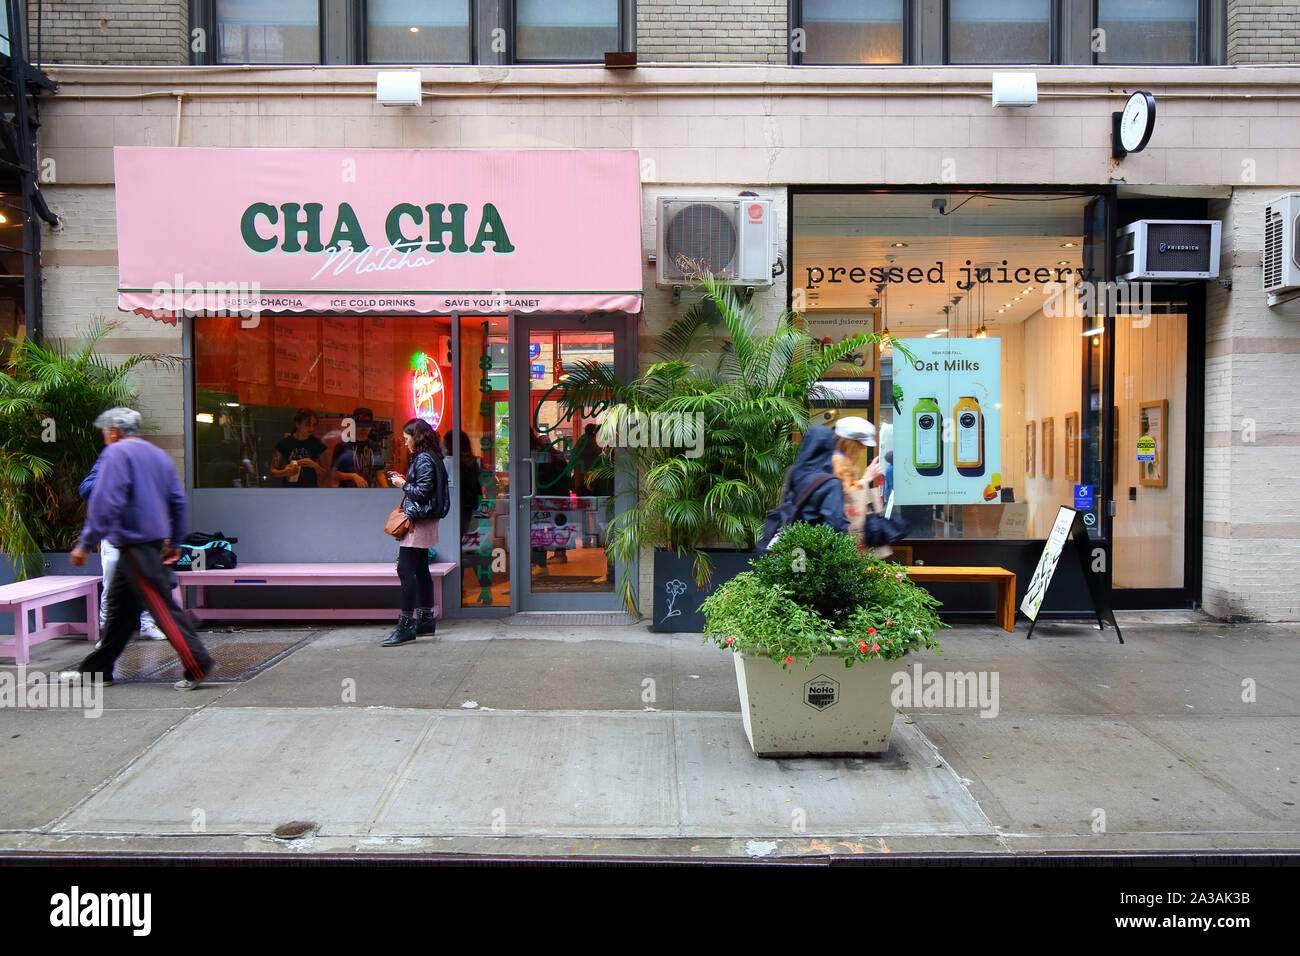 Cha Cha Matcha, Pressed Juicery, 327-329 Lafayette Street, New York, NY. exterior storefront of cafes in the NoHo neighborhood of Manhattan. Stock Photo